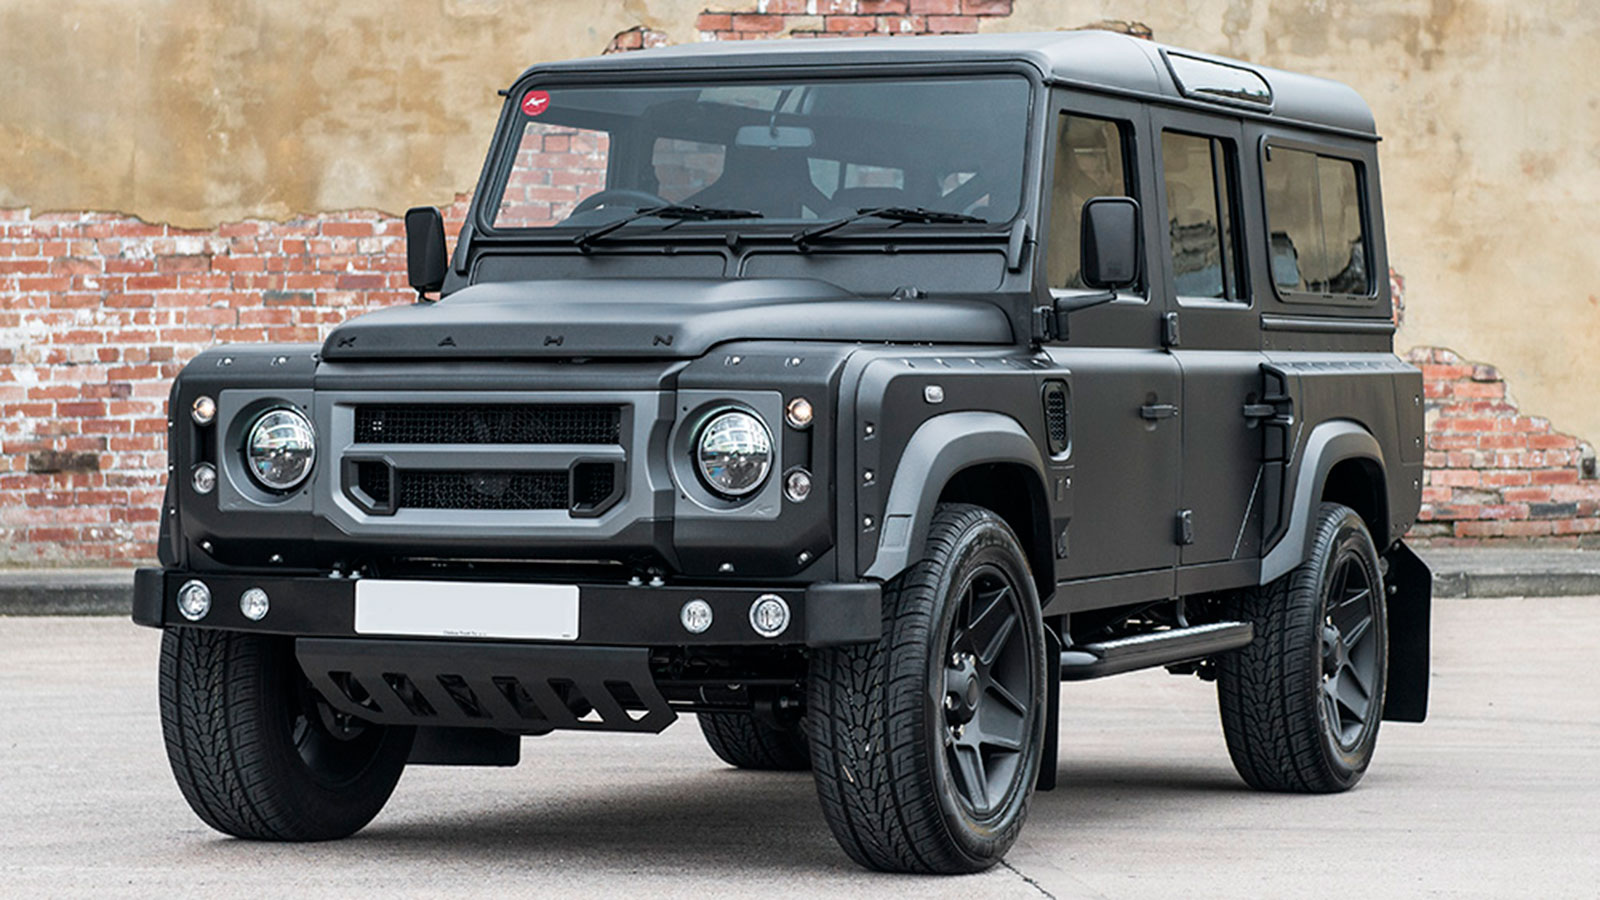 DEFENDER 4×4 “THE END EDITION” BY PROJECT KAHN